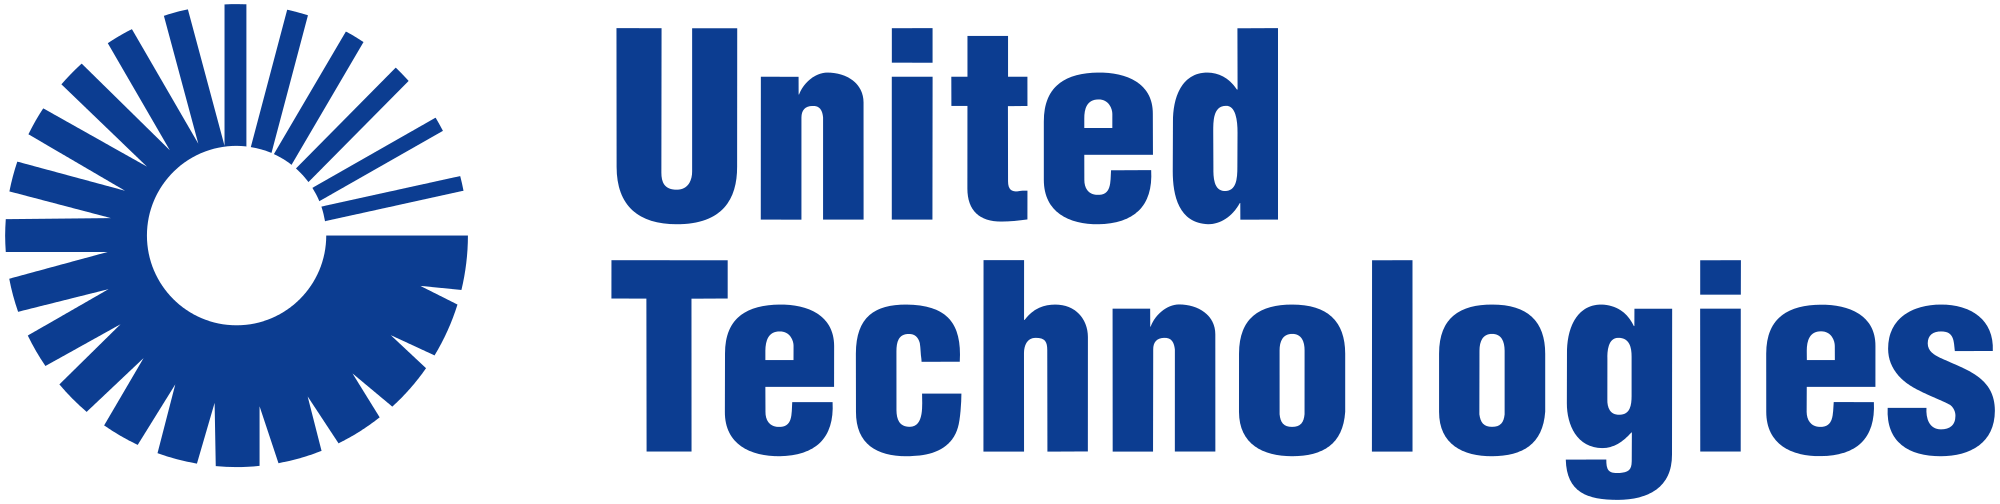 2000px-United_technologies_logo.svg.png